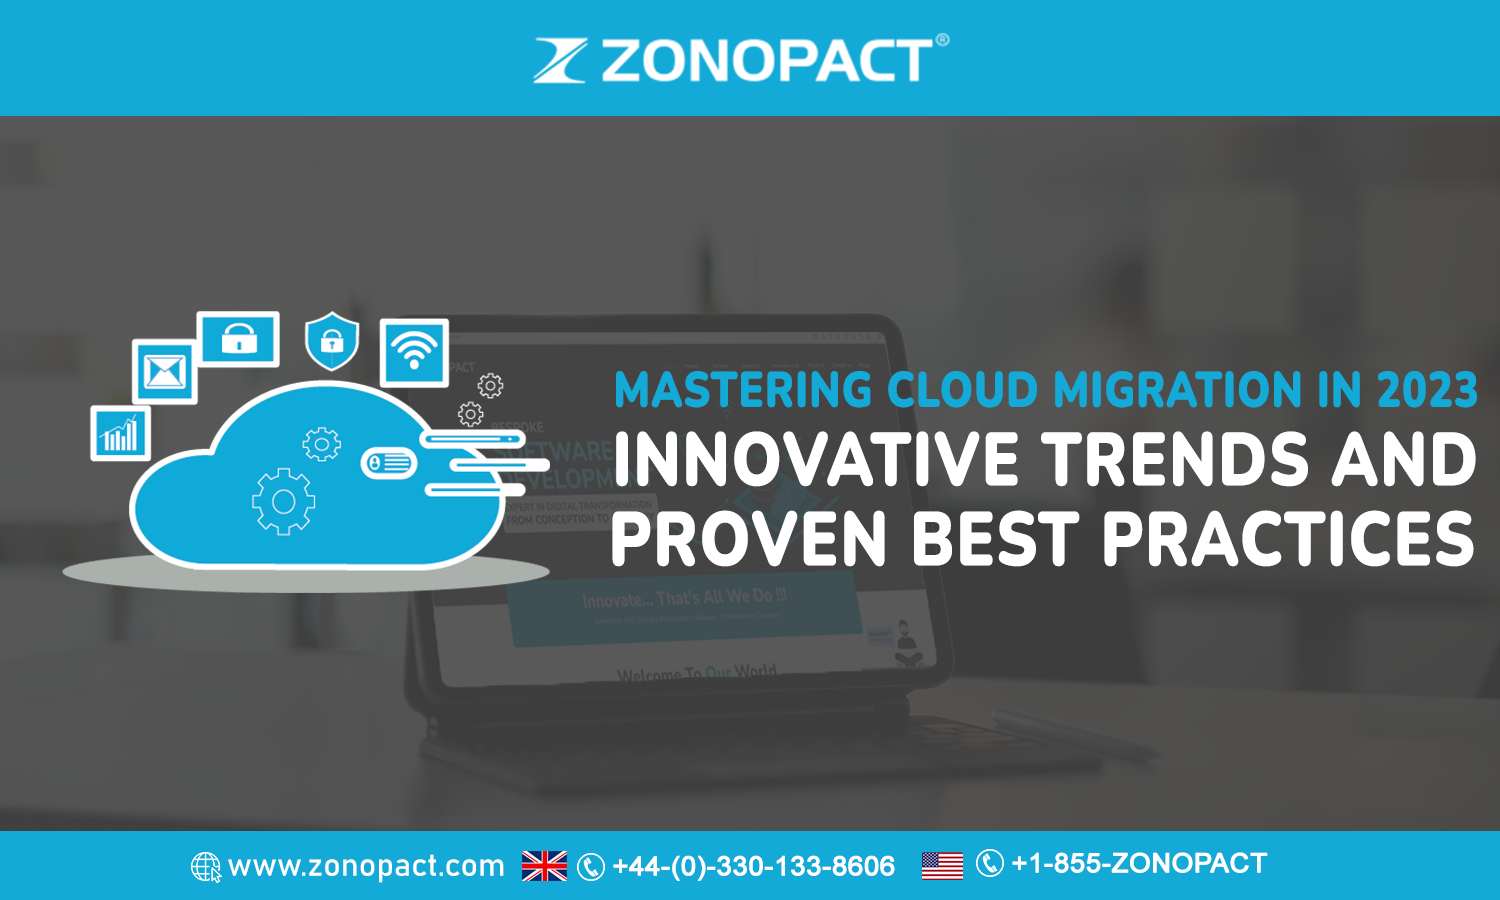 Mastering Cloud Migration in _2023 Innovative Trends and Proven Best Practices (1)